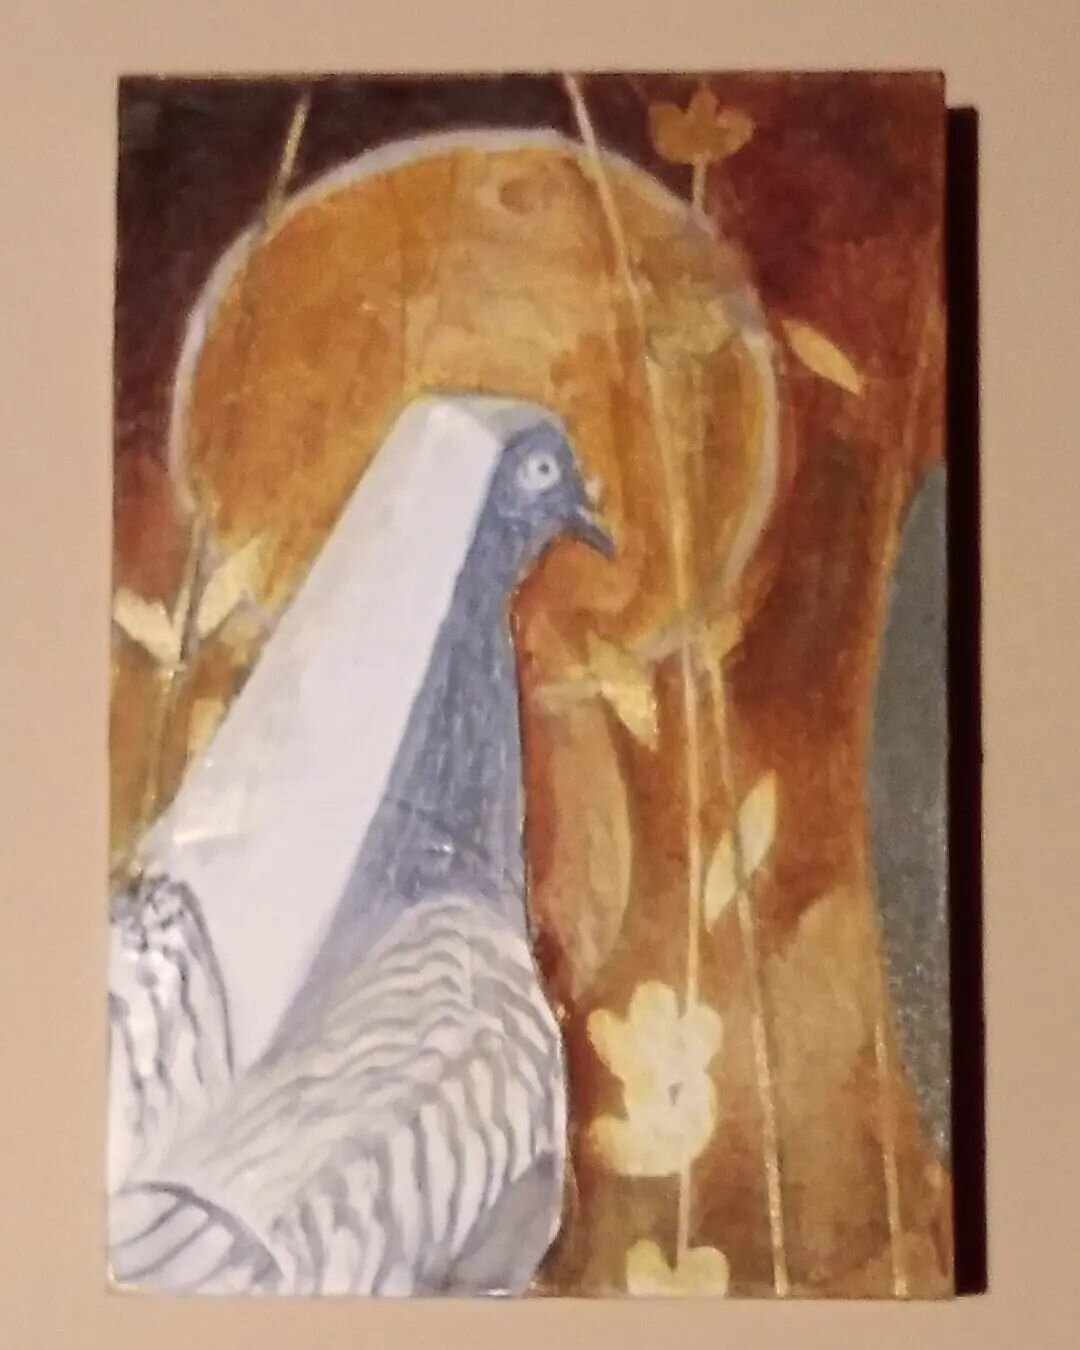 Two pigeons. 
One is inspired by icon paintings and Picasso, and is made of gesso, graphite, decorative paper, and oil on panel (4&times;6 inches). The second is sanded acrylic on paper (6&times;8 inches). 
#pigeonlove